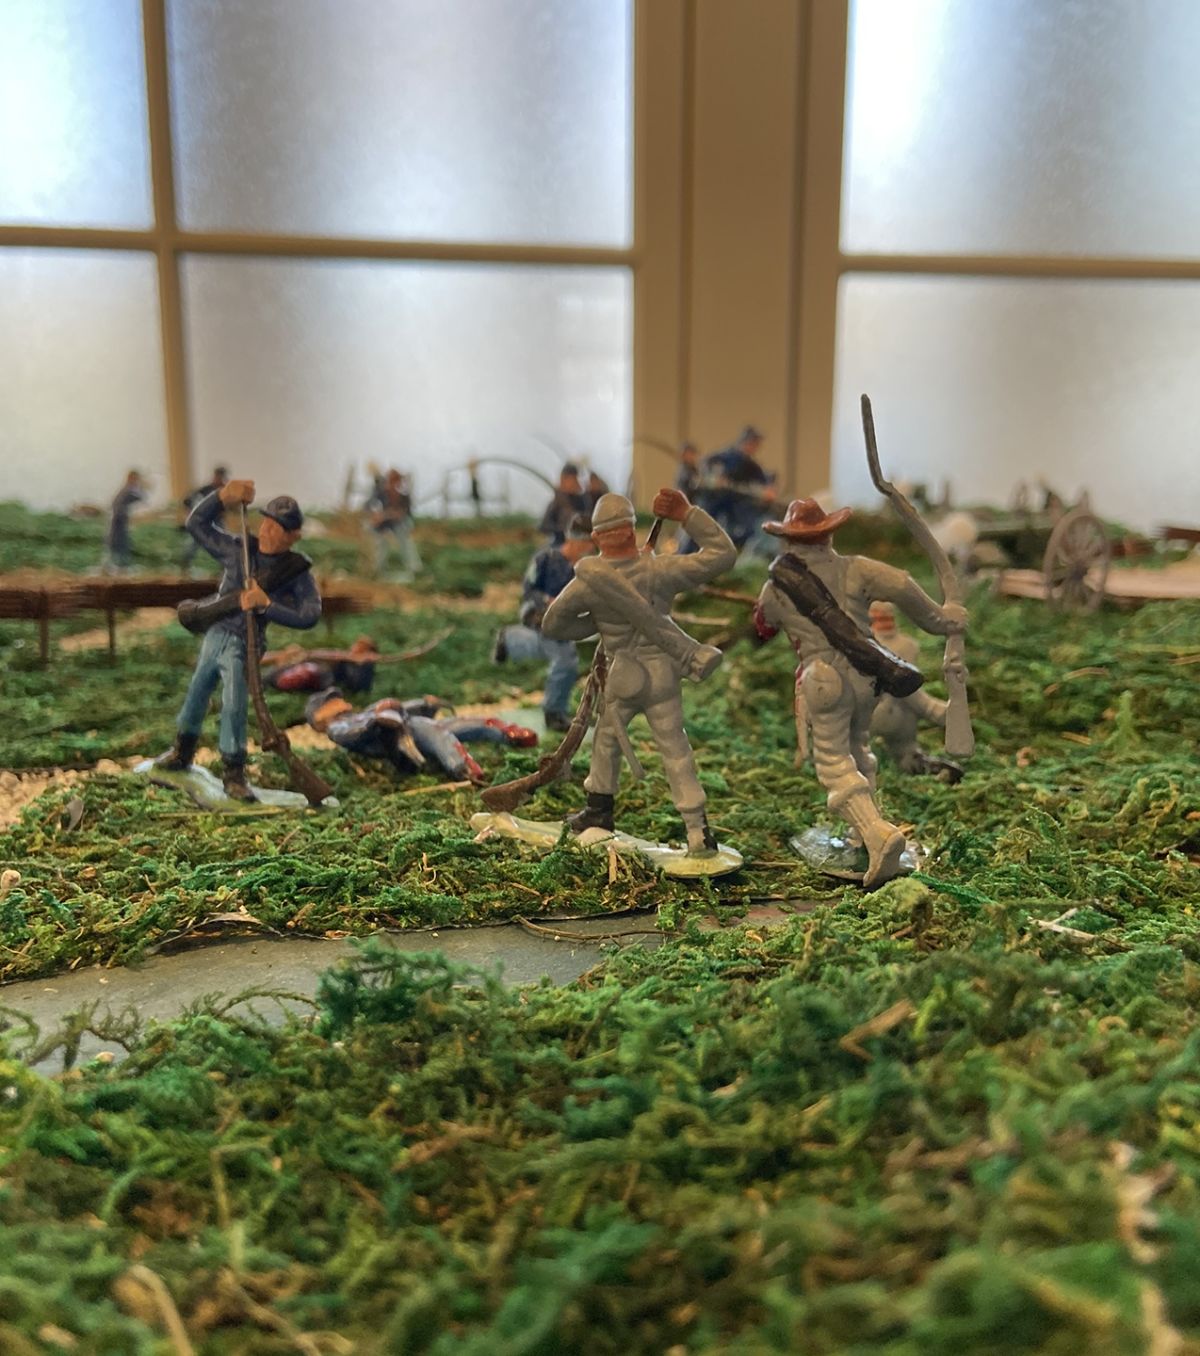 Students Construct Model of The Battle of Gettysburg